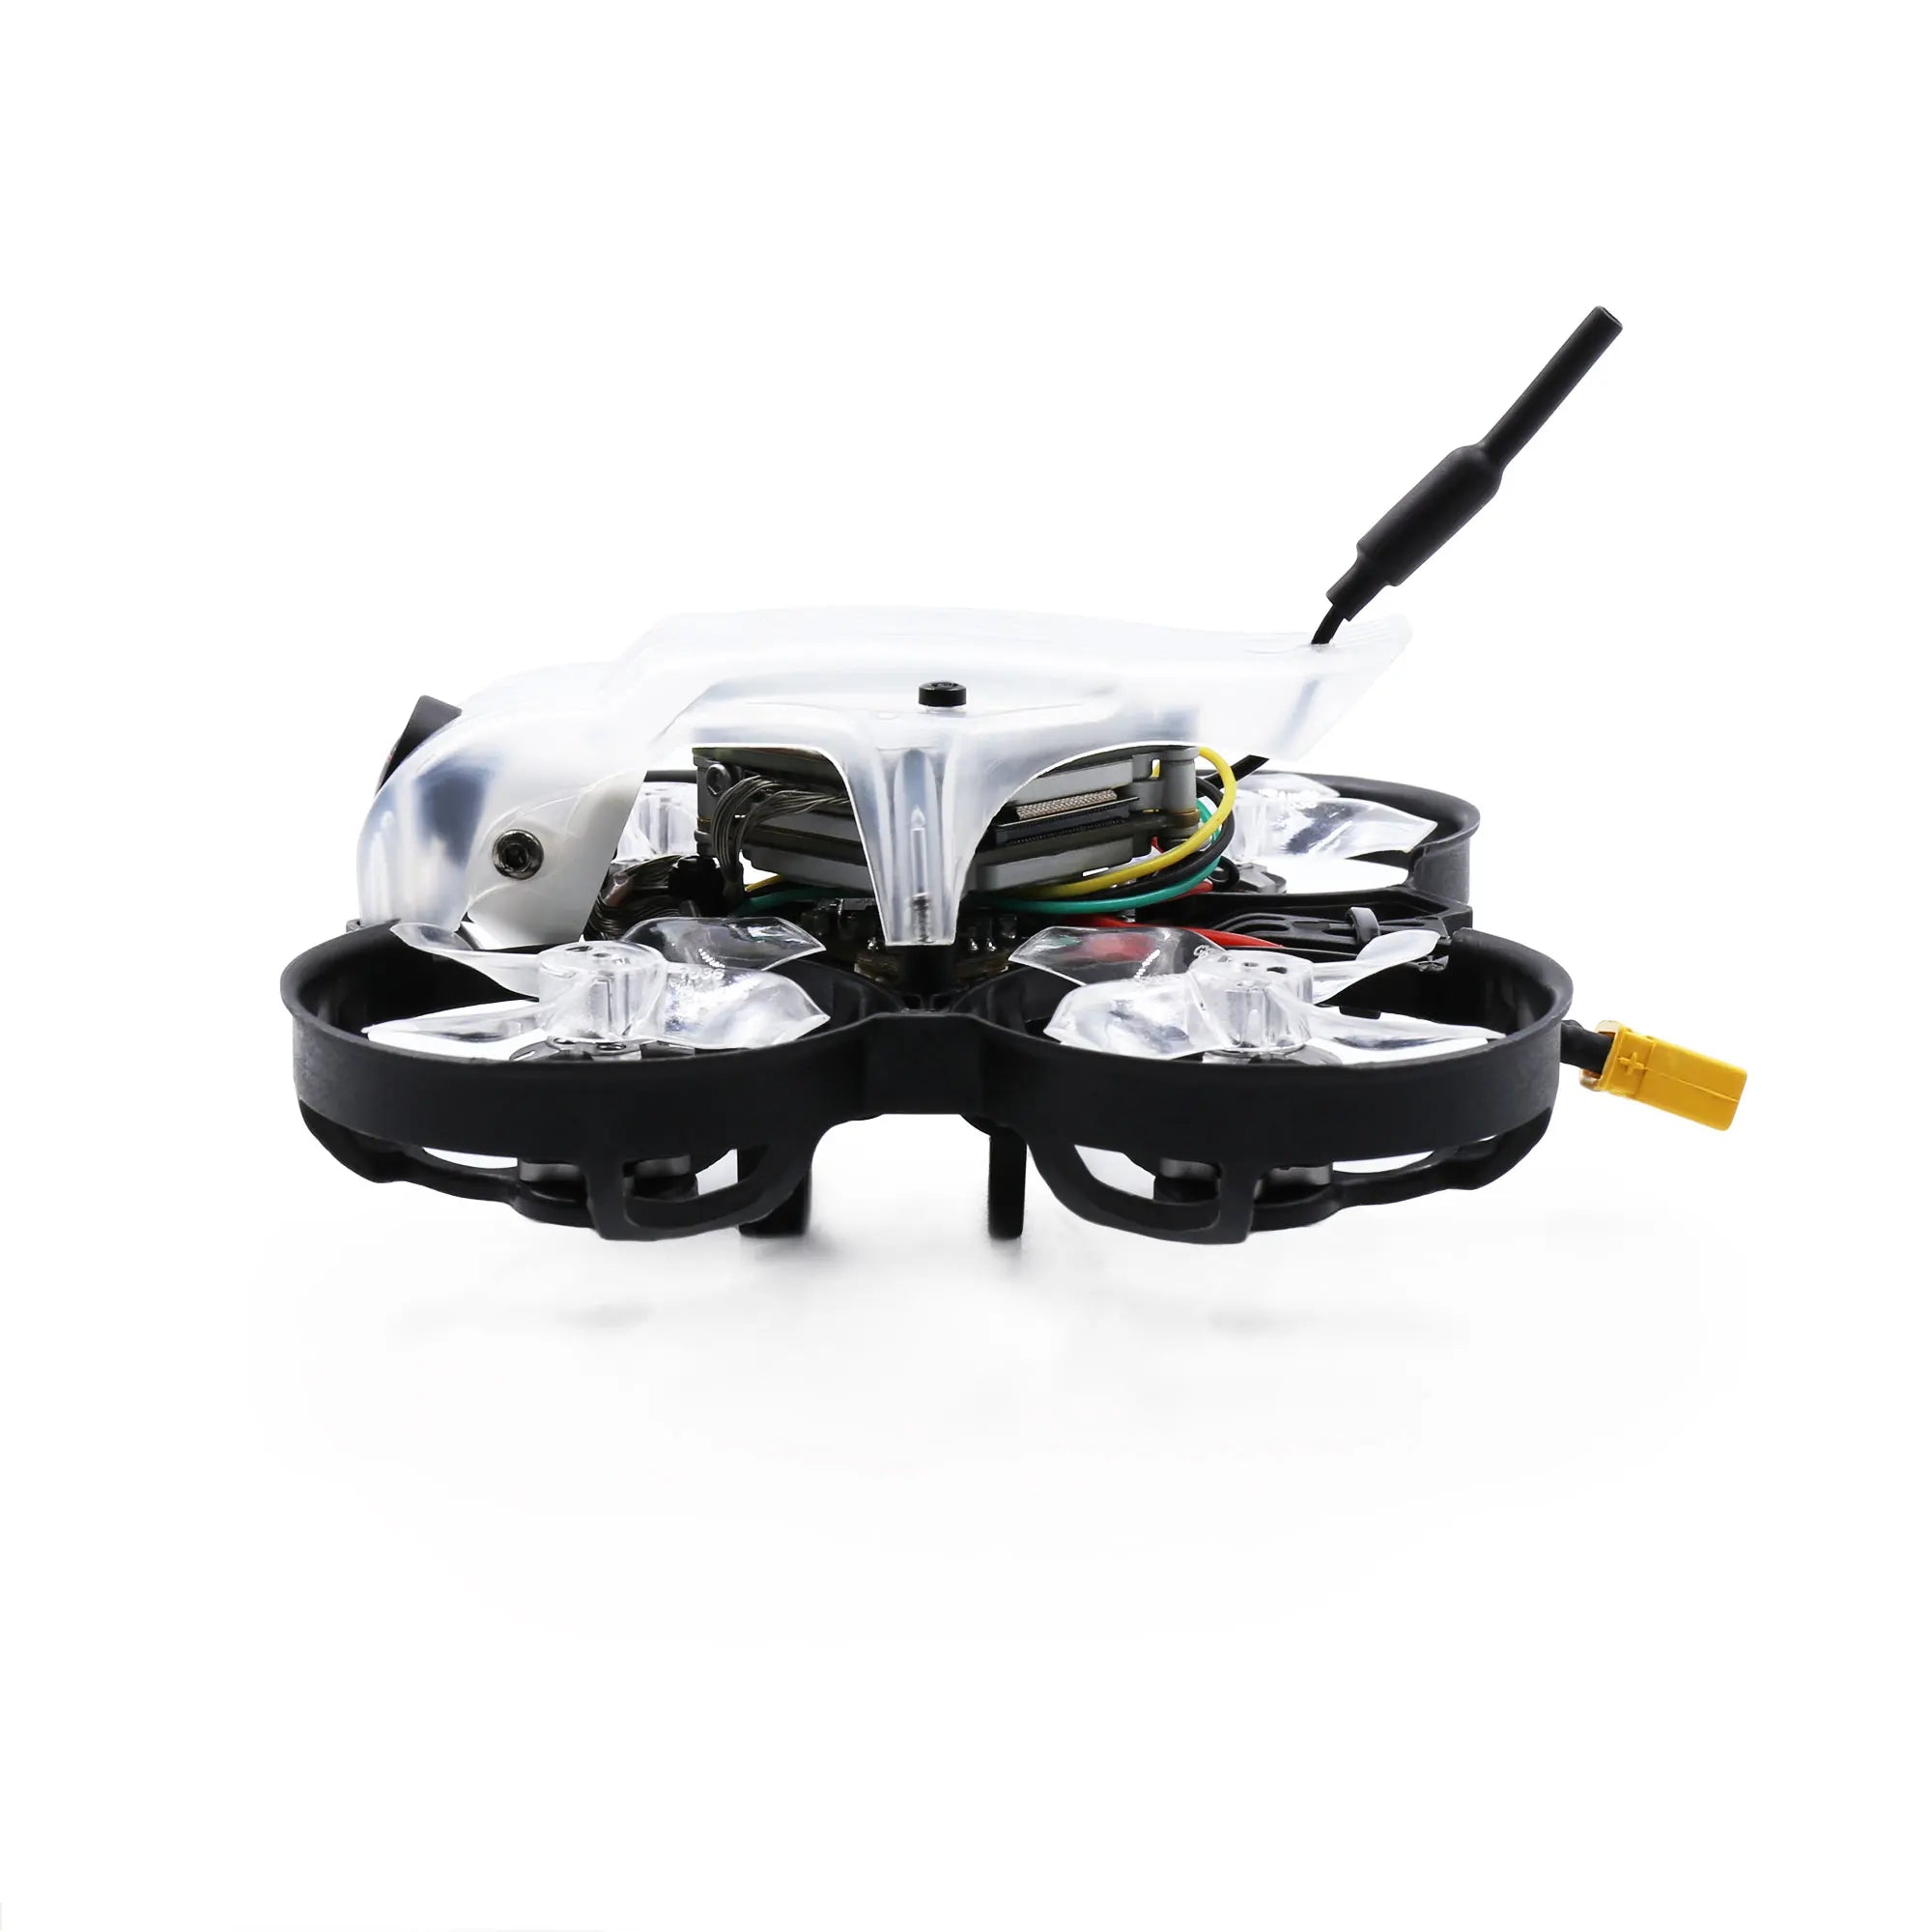 GEPRC Thinking P16 FPV Drone, Caddx Vista Polar brings HD FPV experience with prop guards .